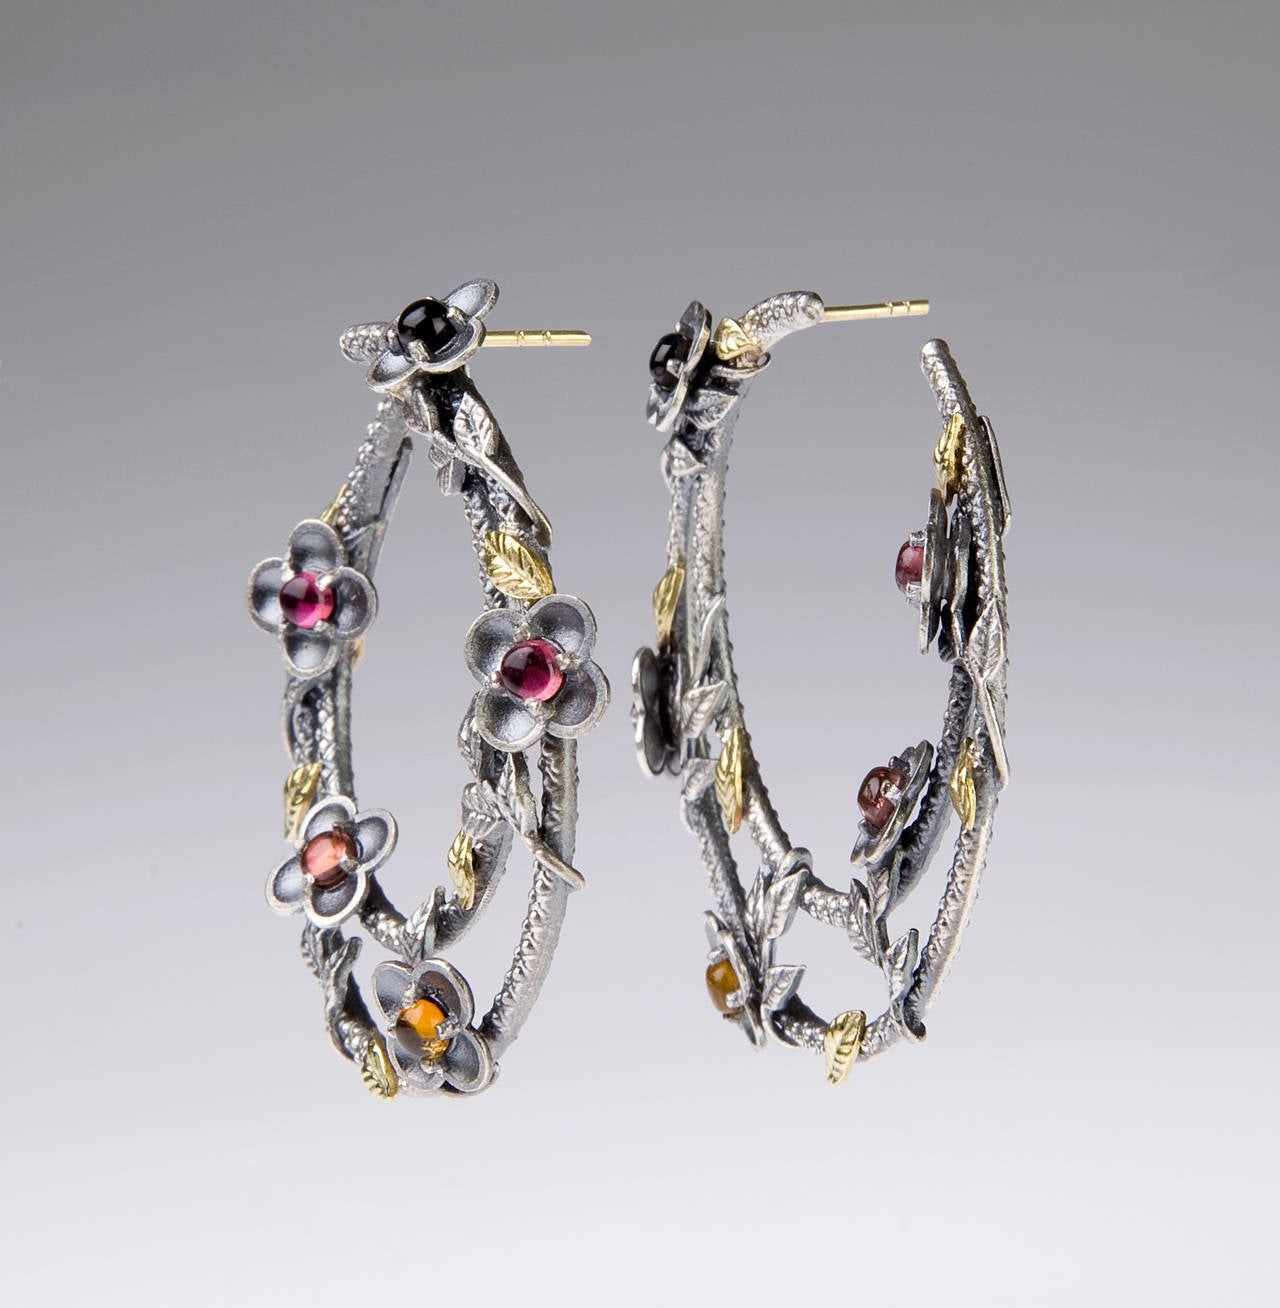 Aged Silver & 18K Gold Hoop Earrings With Multi-Color Tourmalines by Stambolian

2 carat's of Multi-Color 

Earrings are side-hoops and are slightly slanted for a stunning look. They dress beautifully and have gorgeous gold leaves placed around the